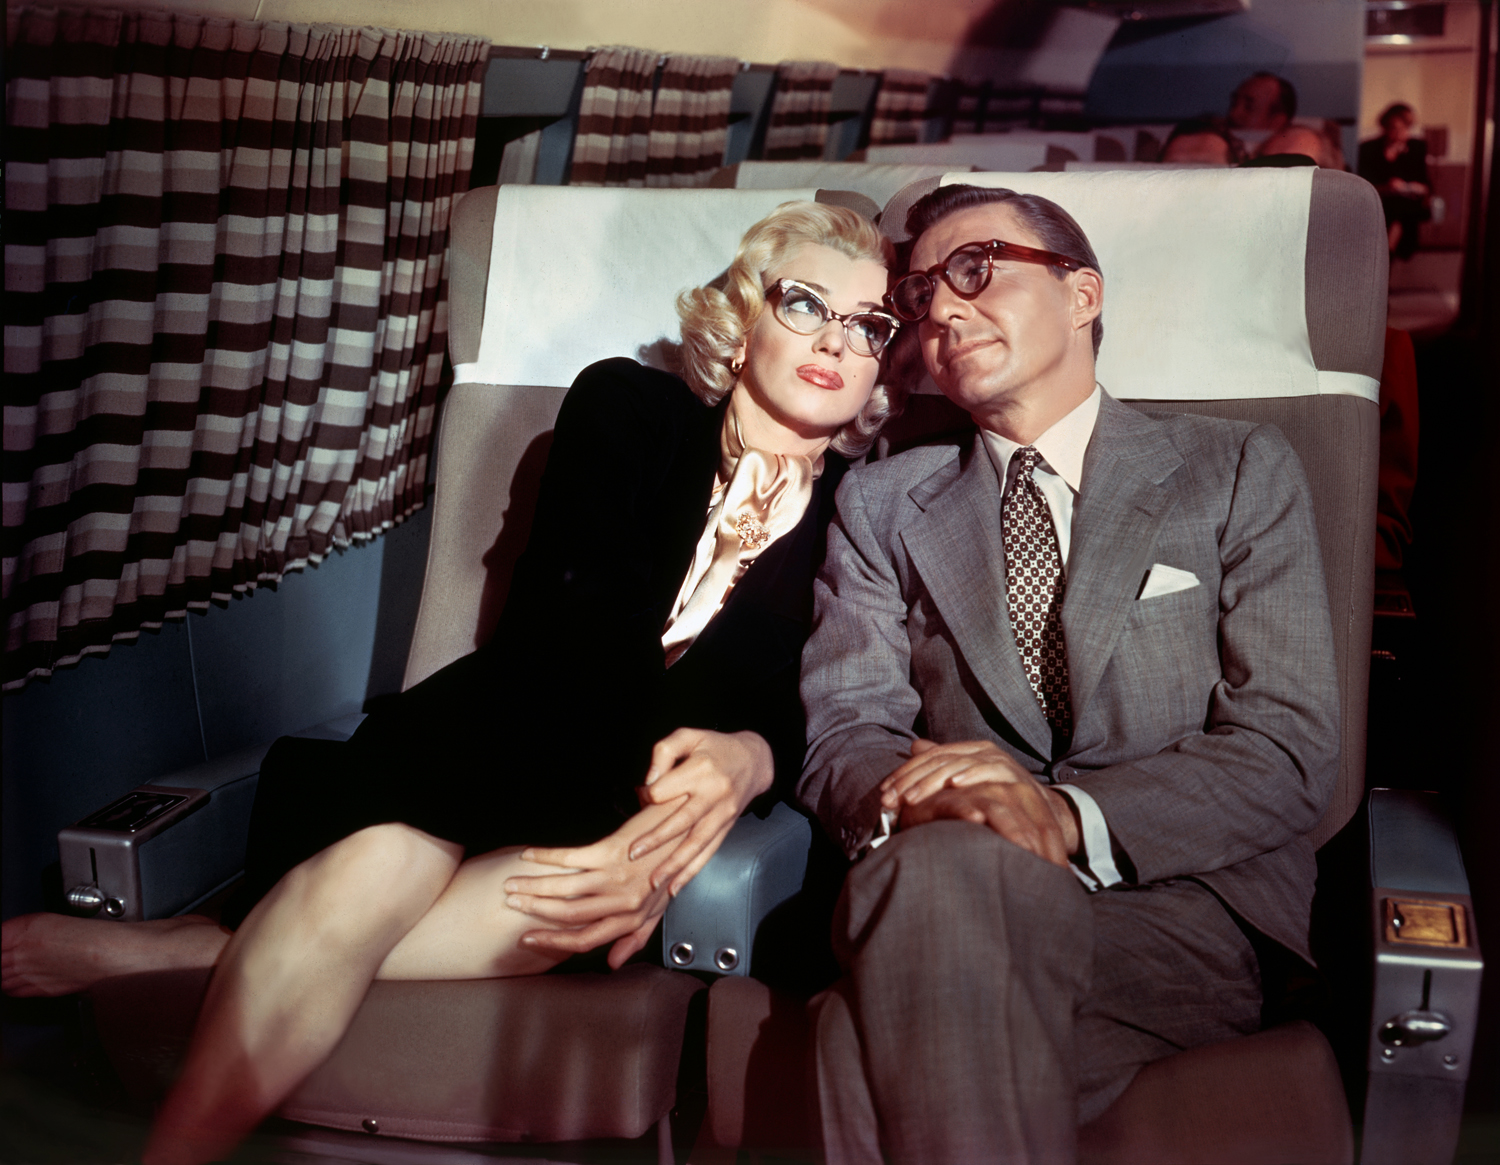 In the early 1950s, Monroe mugs on the set of How to Marry a Millionaire with fellow actor David Wayne.